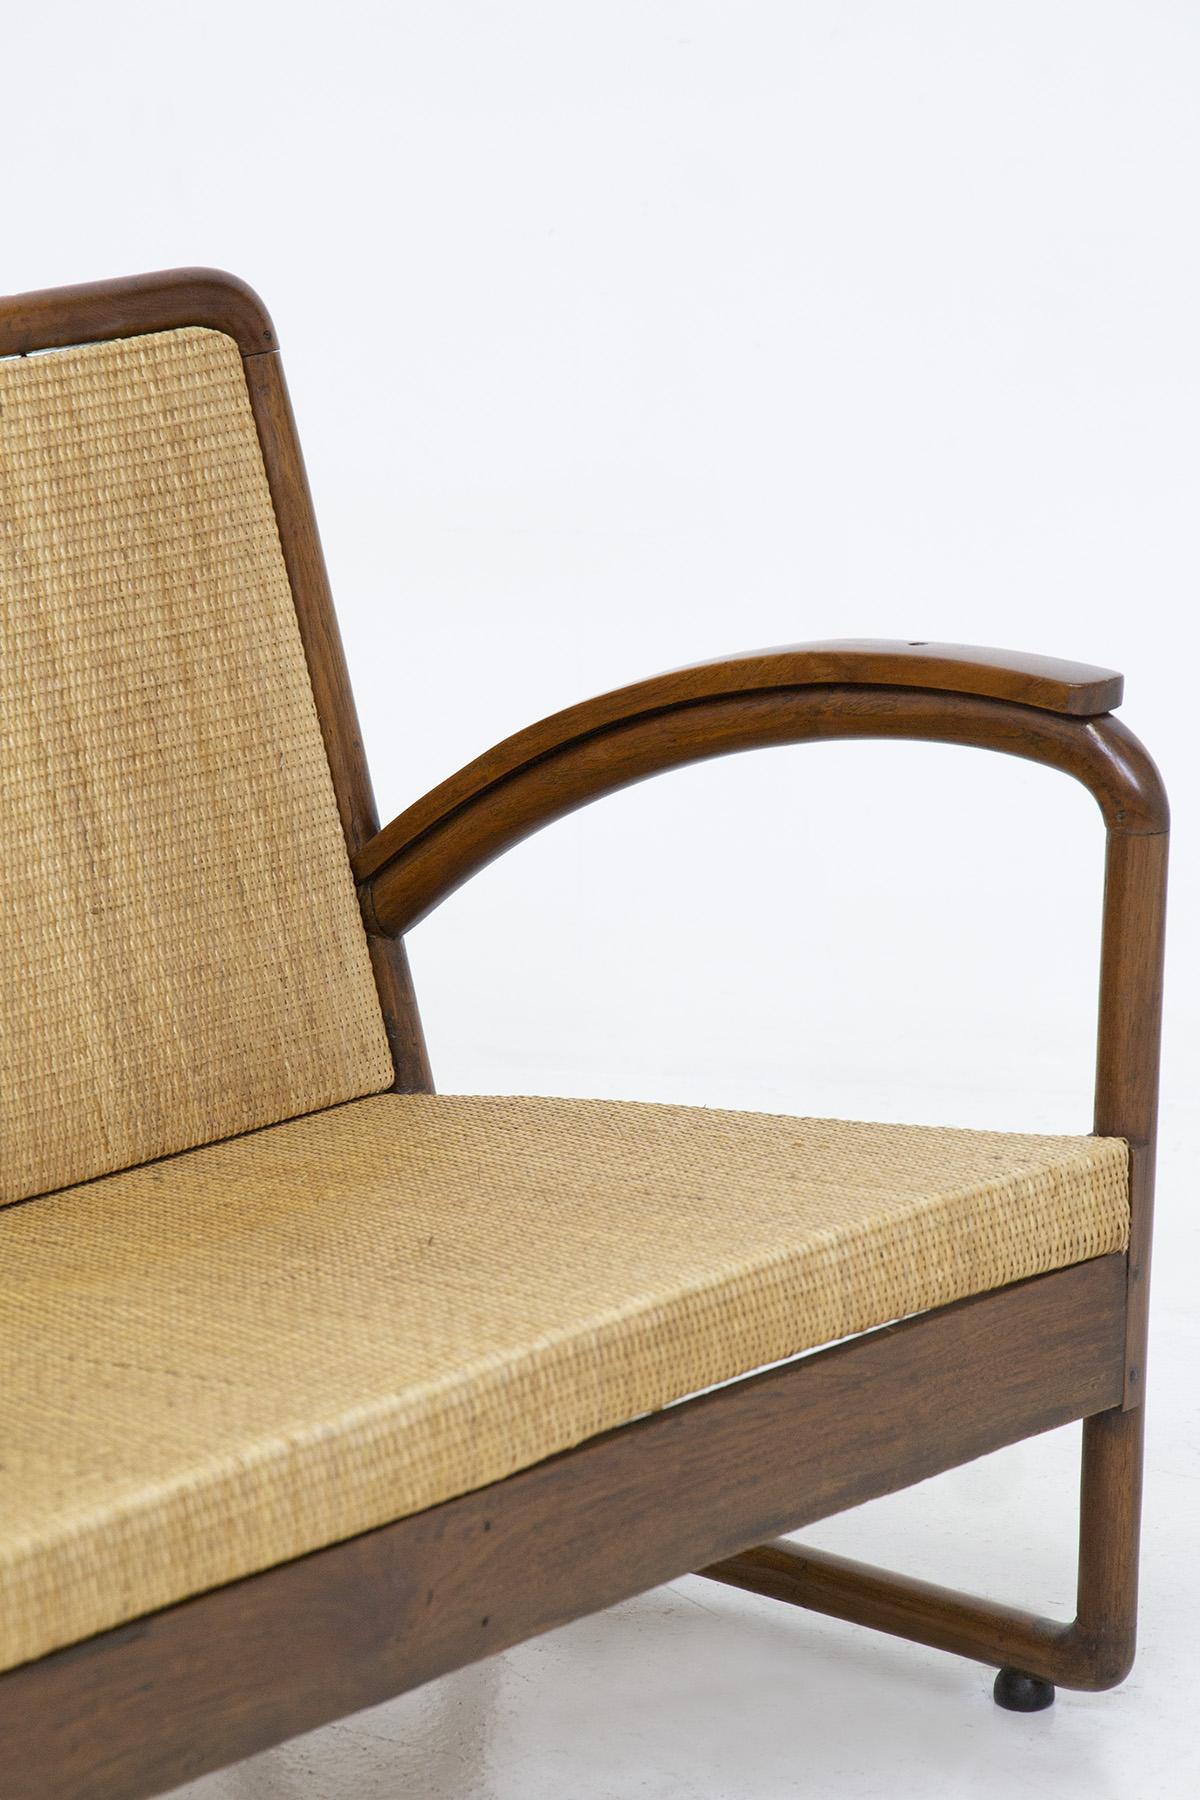 Italian Rationalist Loveseat in Wood and Rattan In Good Condition For Sale In Milano, IT